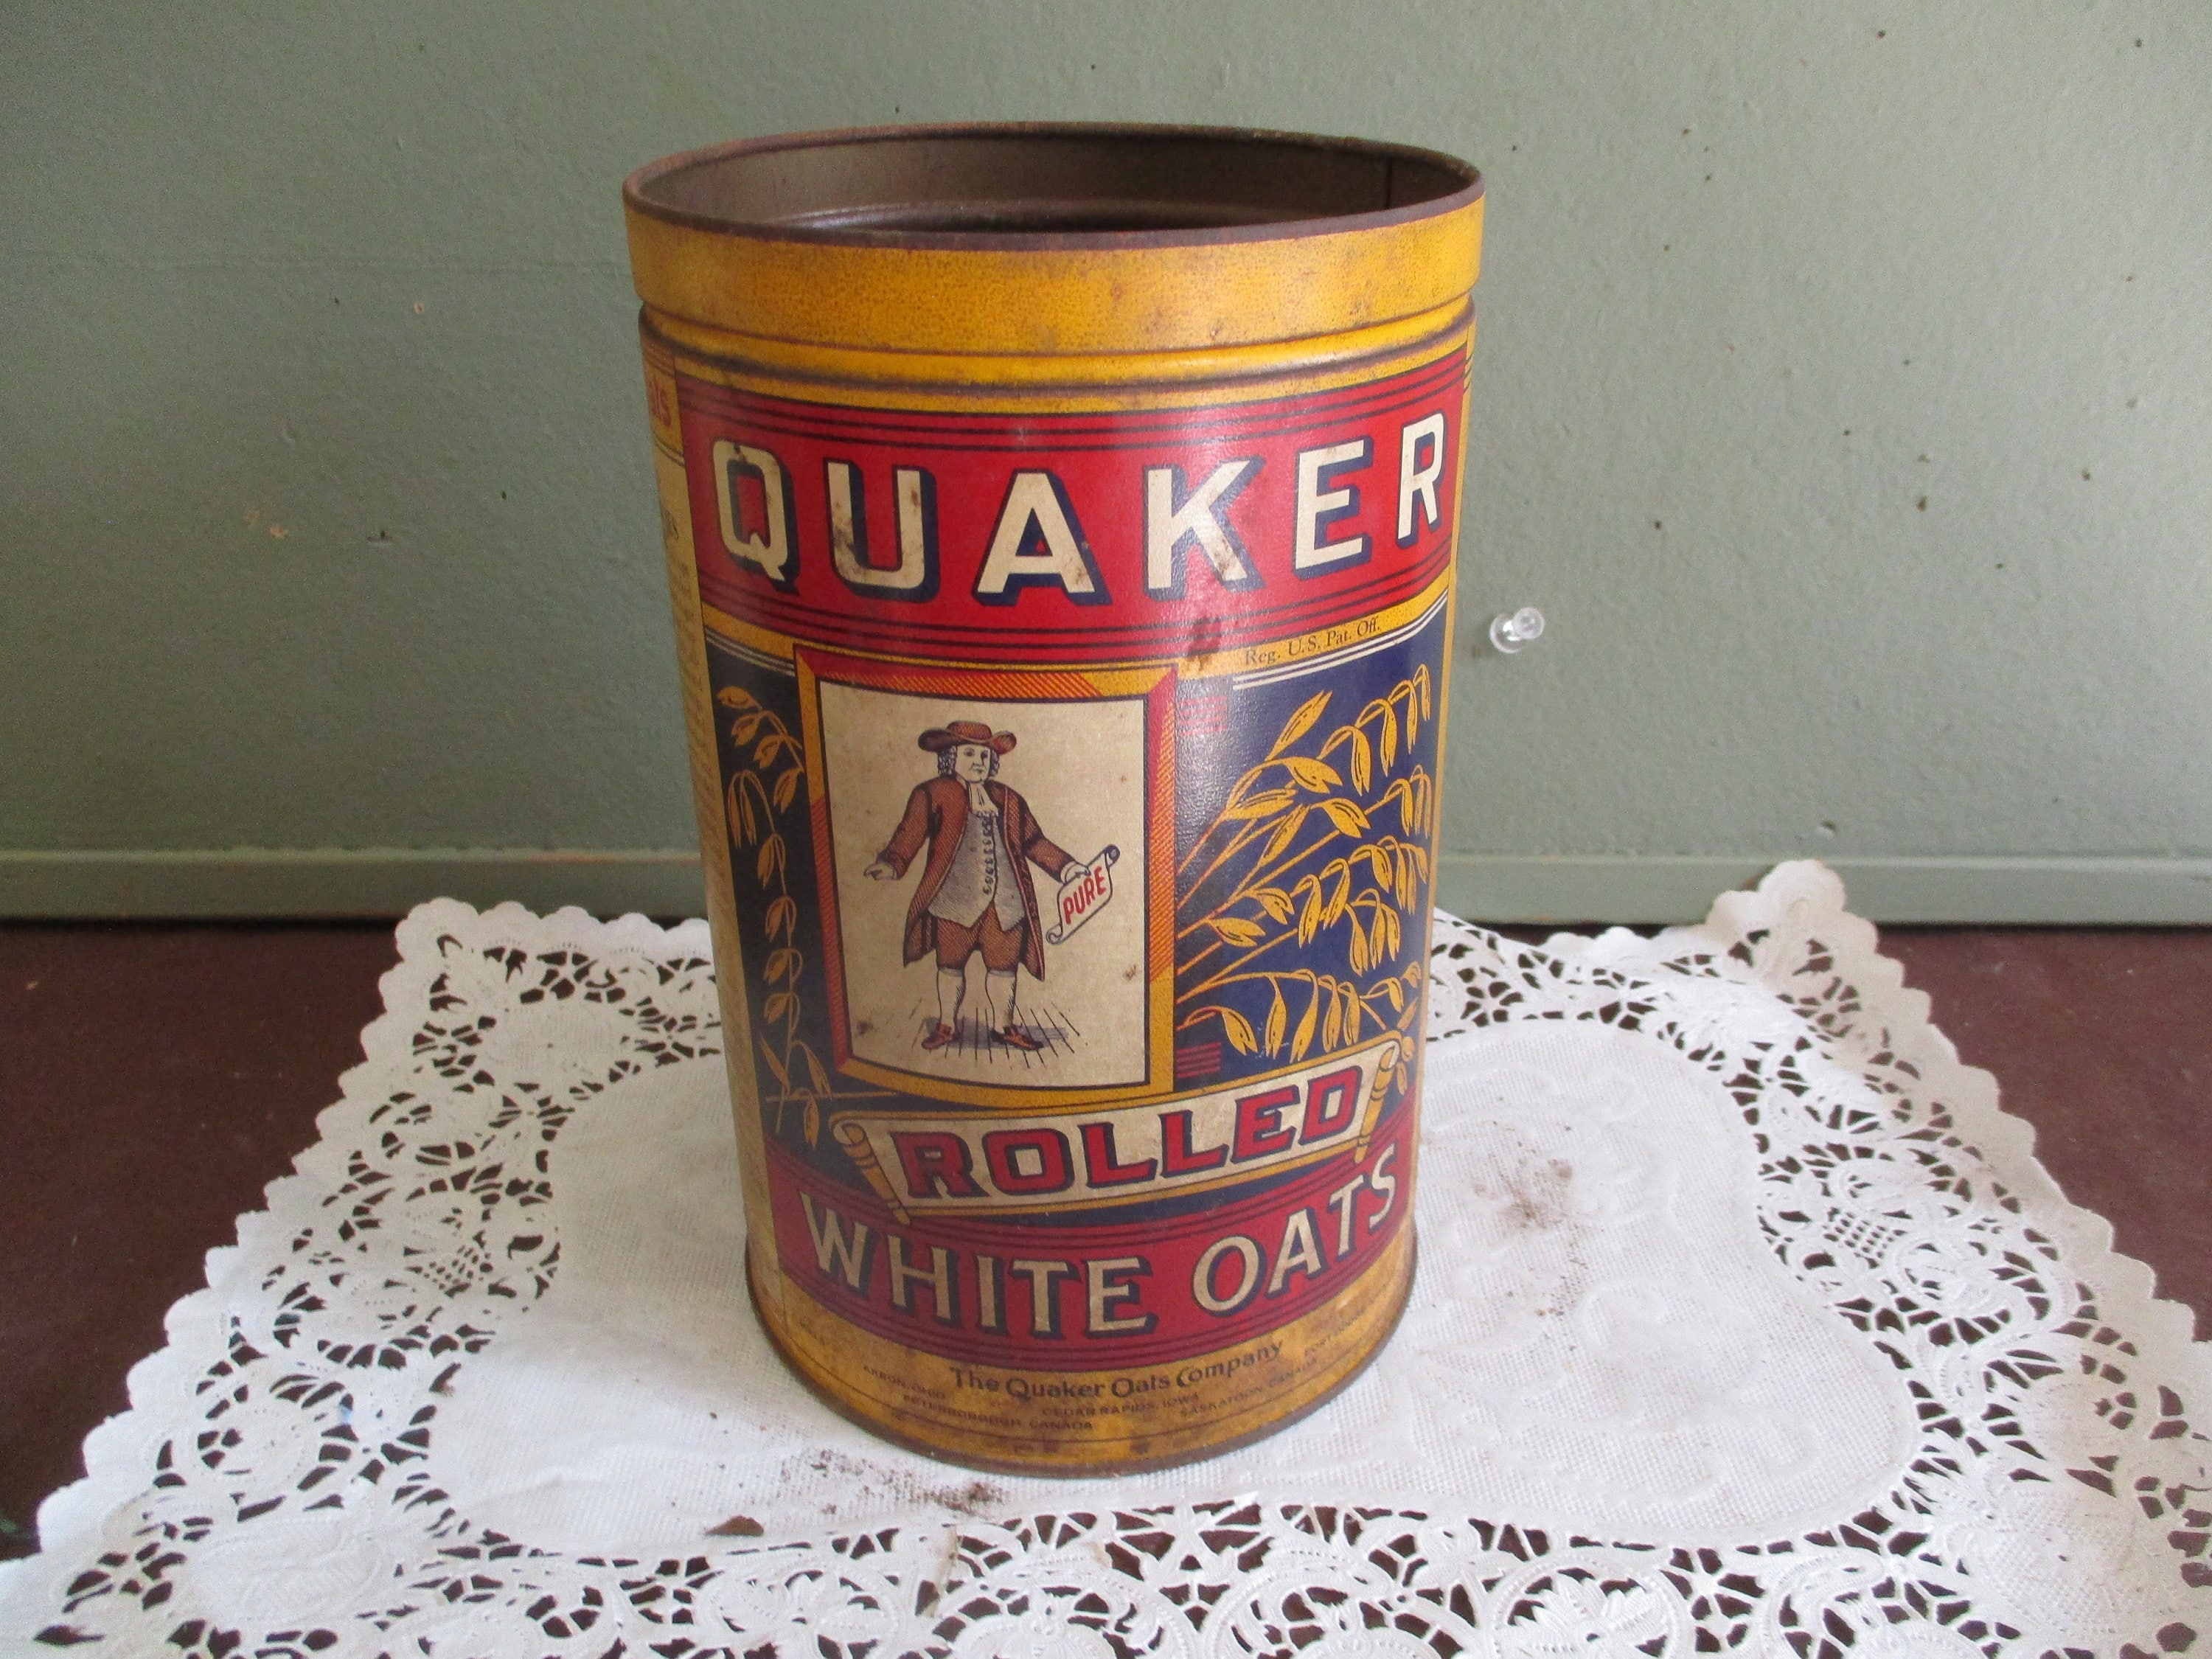 Shop the Vintage Old Fashioned Quaker Oats Cookie Jar at Weston Table